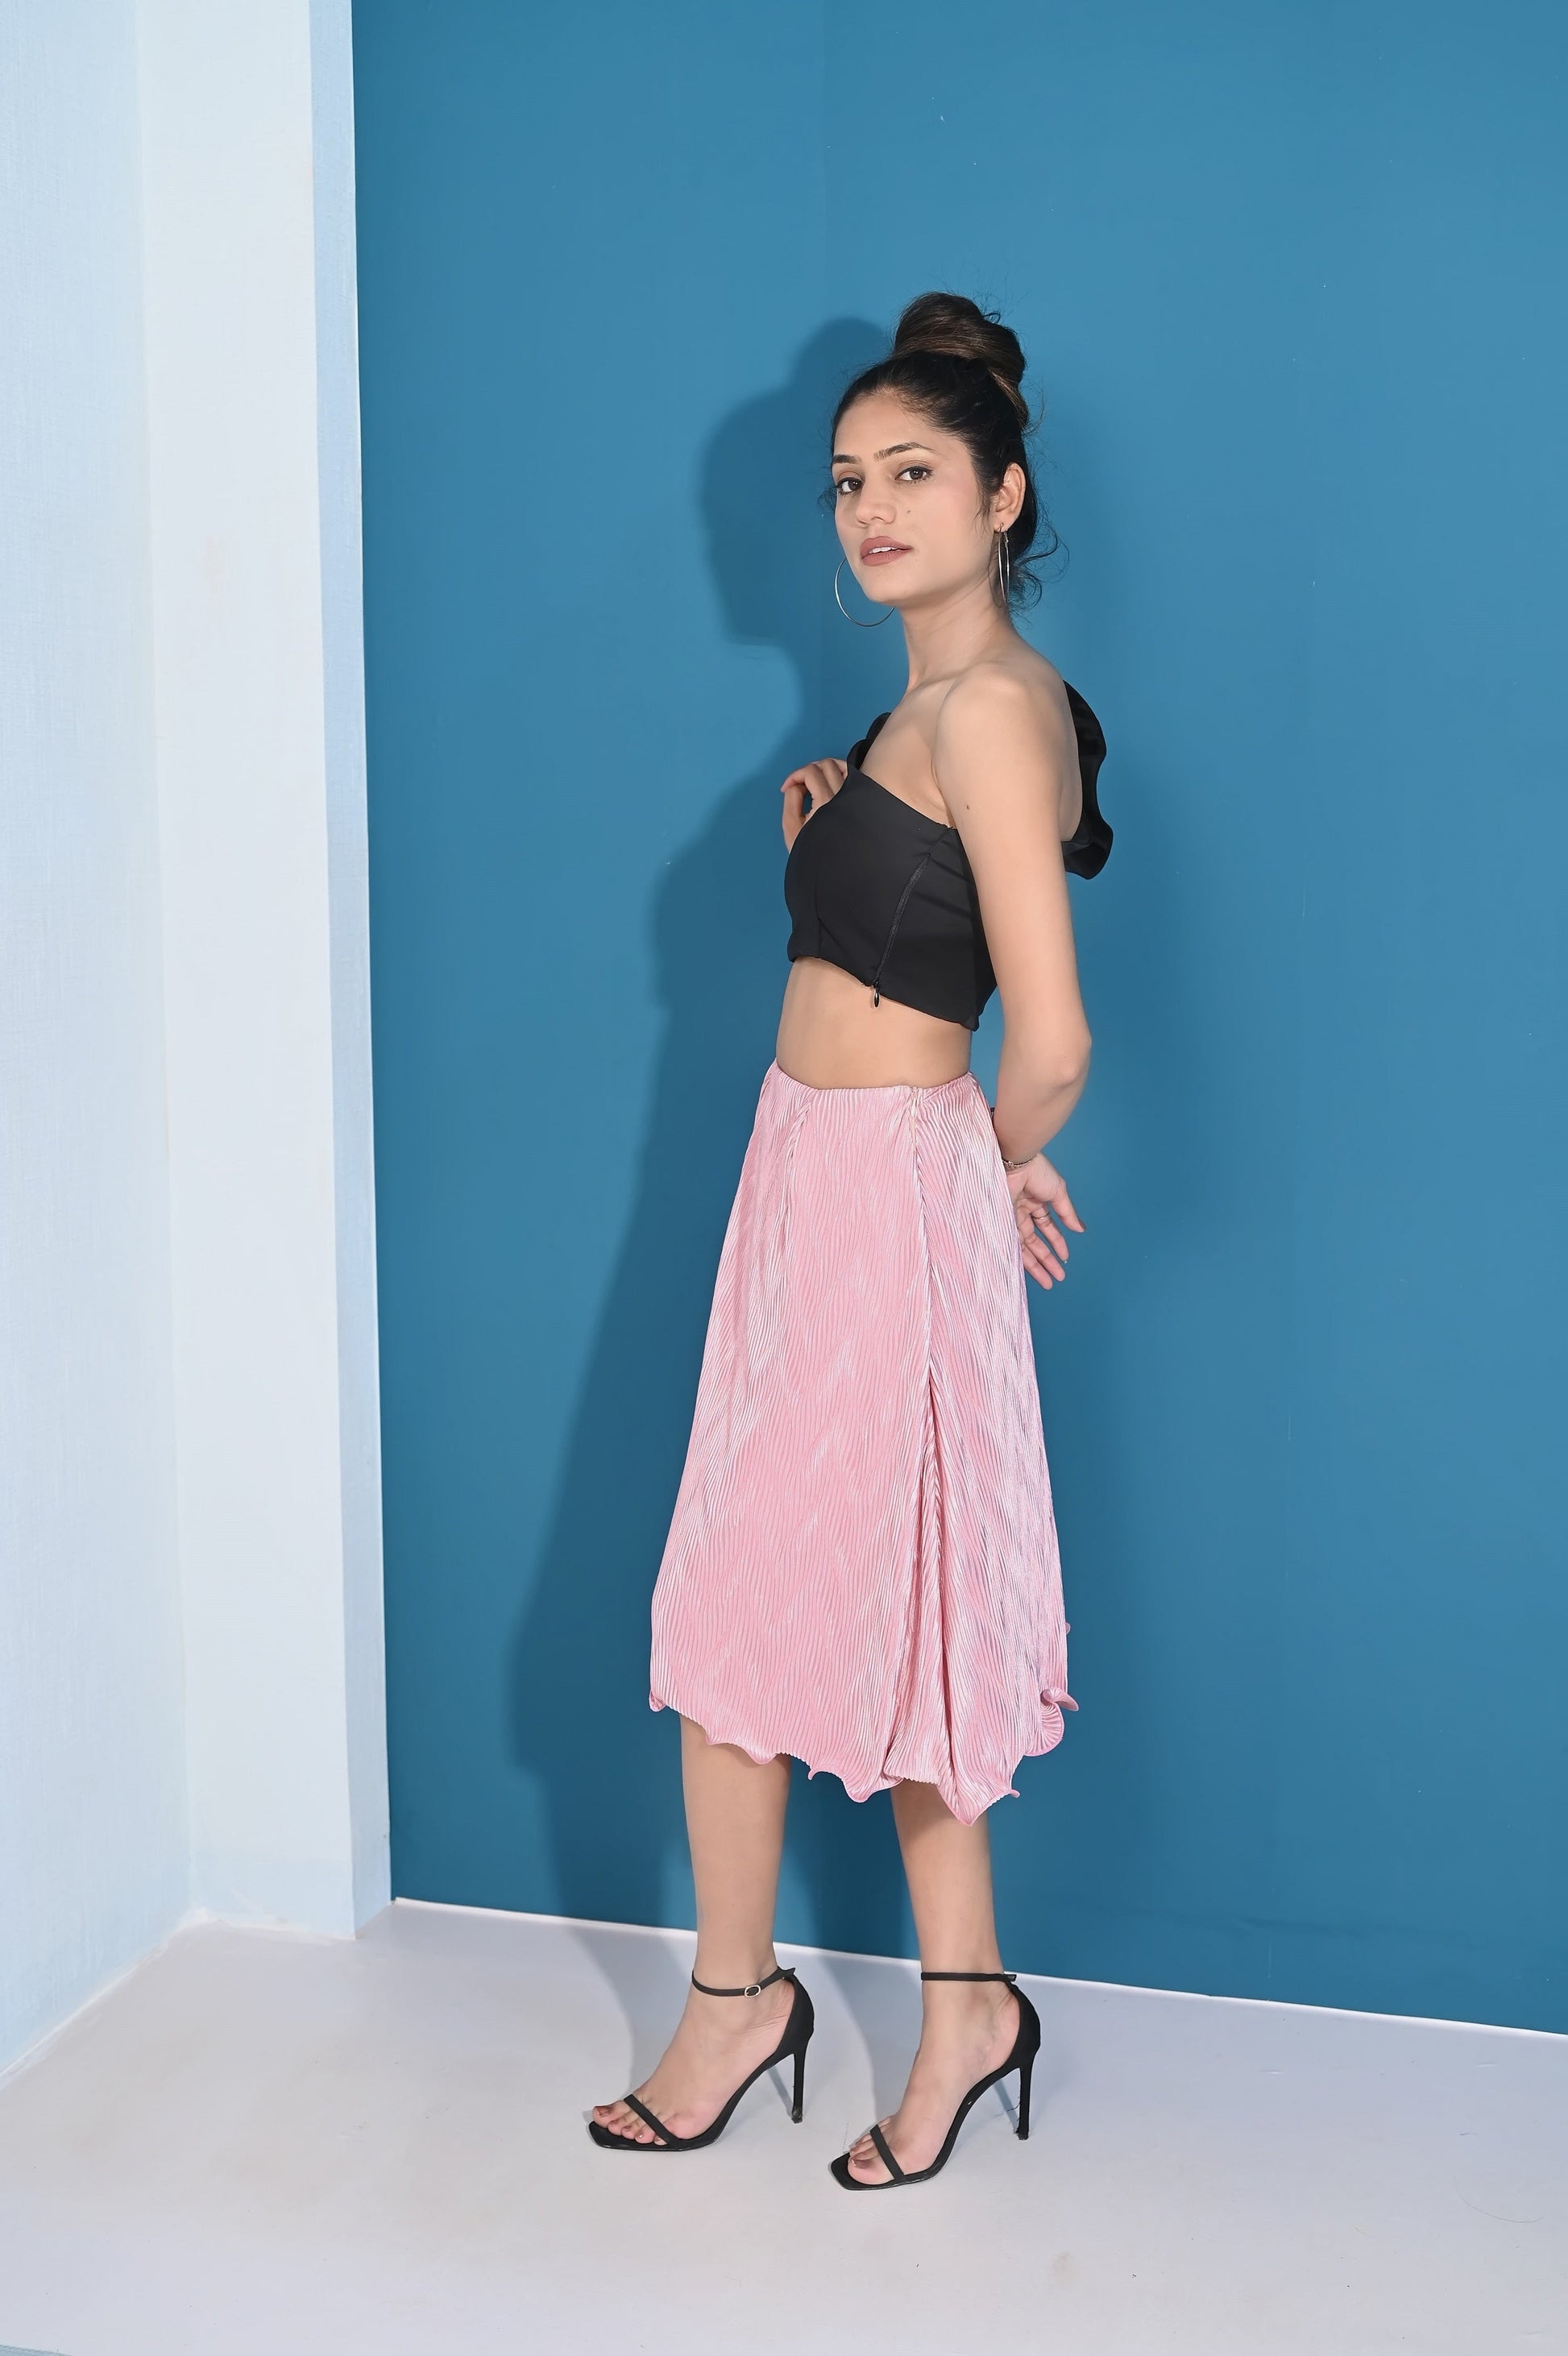 Luxurious Union of Knee-Length Skirt With One-Shoulder Crop Top | GlamzLife